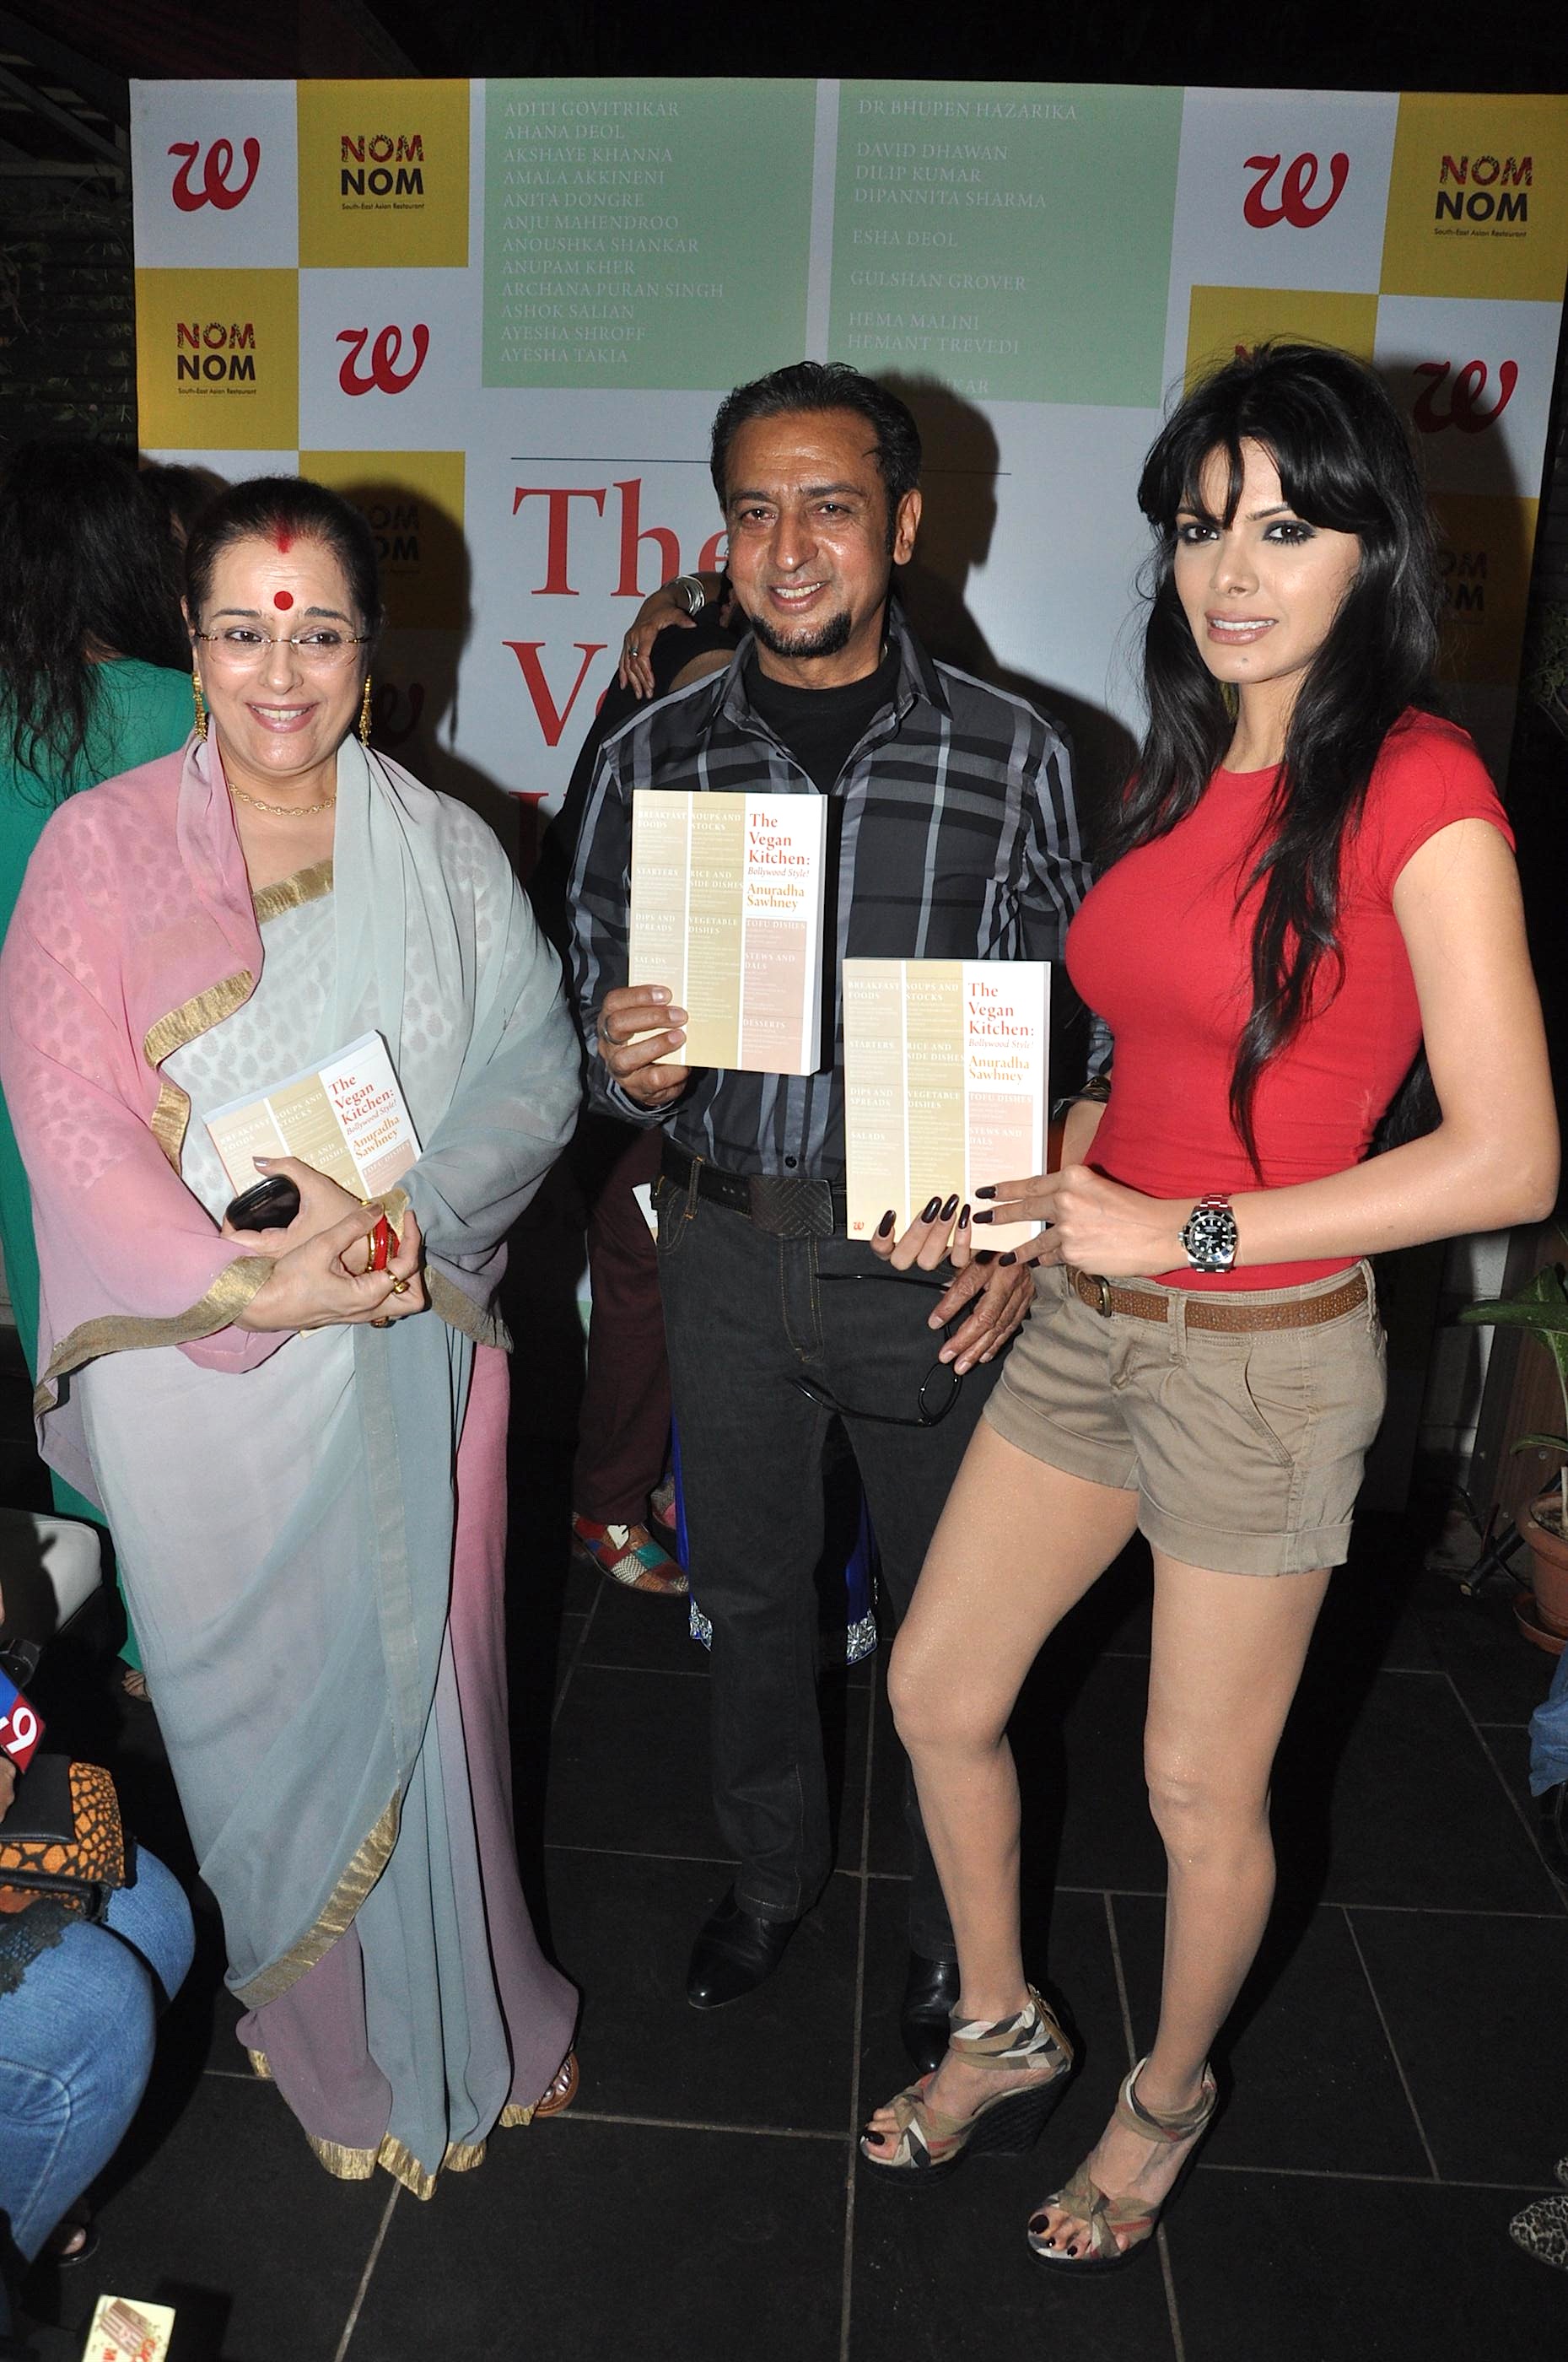 Poonam Sinha, Gulshan Grover along with Sherlyn Chopra at The Vegan Kitchen book launch on 4th Feb 2013